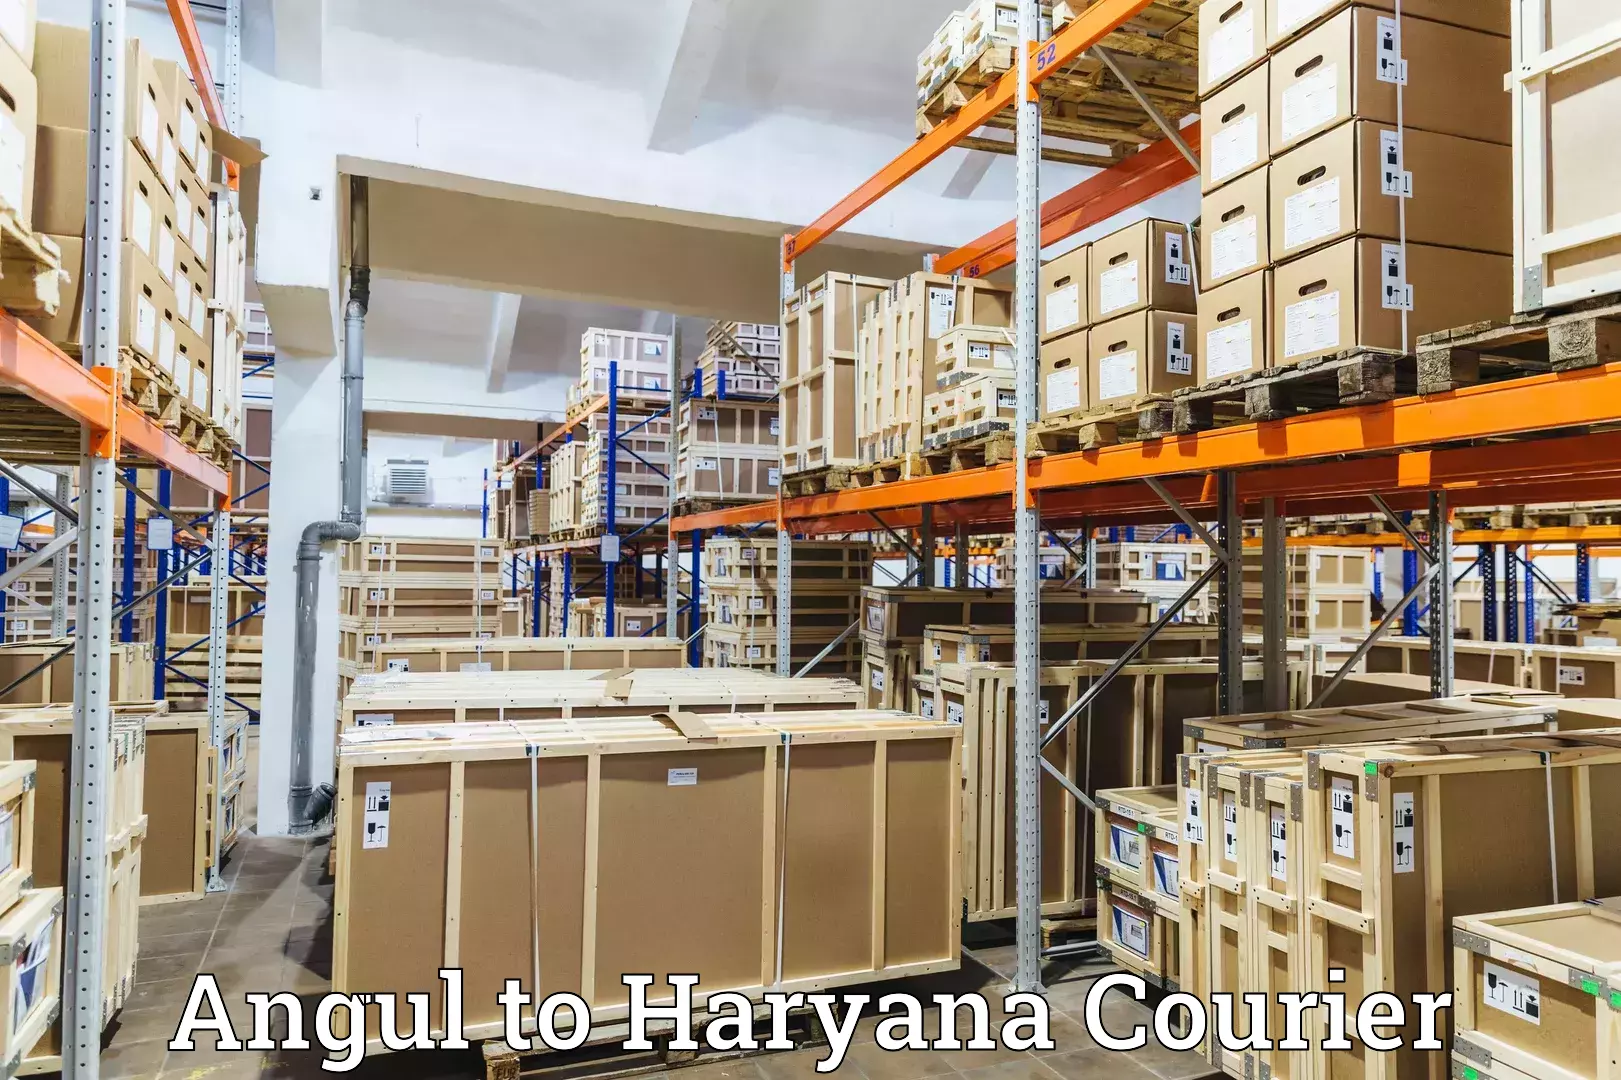 Corporate courier solutions Angul to Bilaspur Haryana